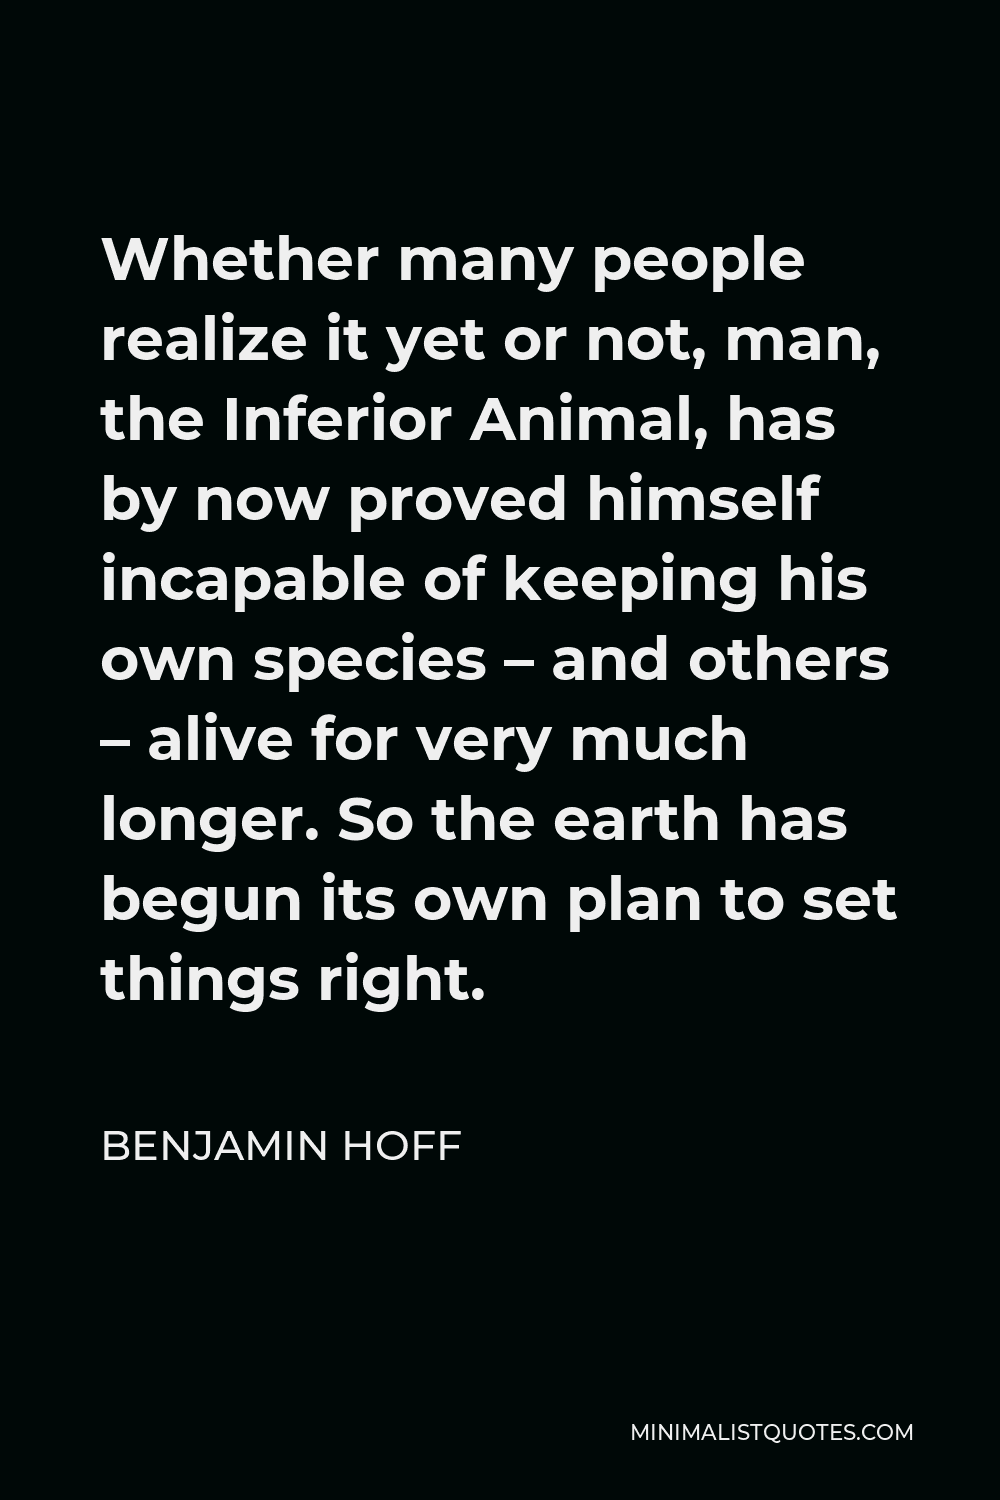 Benjamin Hoff Quote - Whether many people realize it yet or not, man, the Inferior Animal, has by now proved himself incapable of keeping his own species – and others – alive for very much longer. So the earth has begun its own plan to set things right.